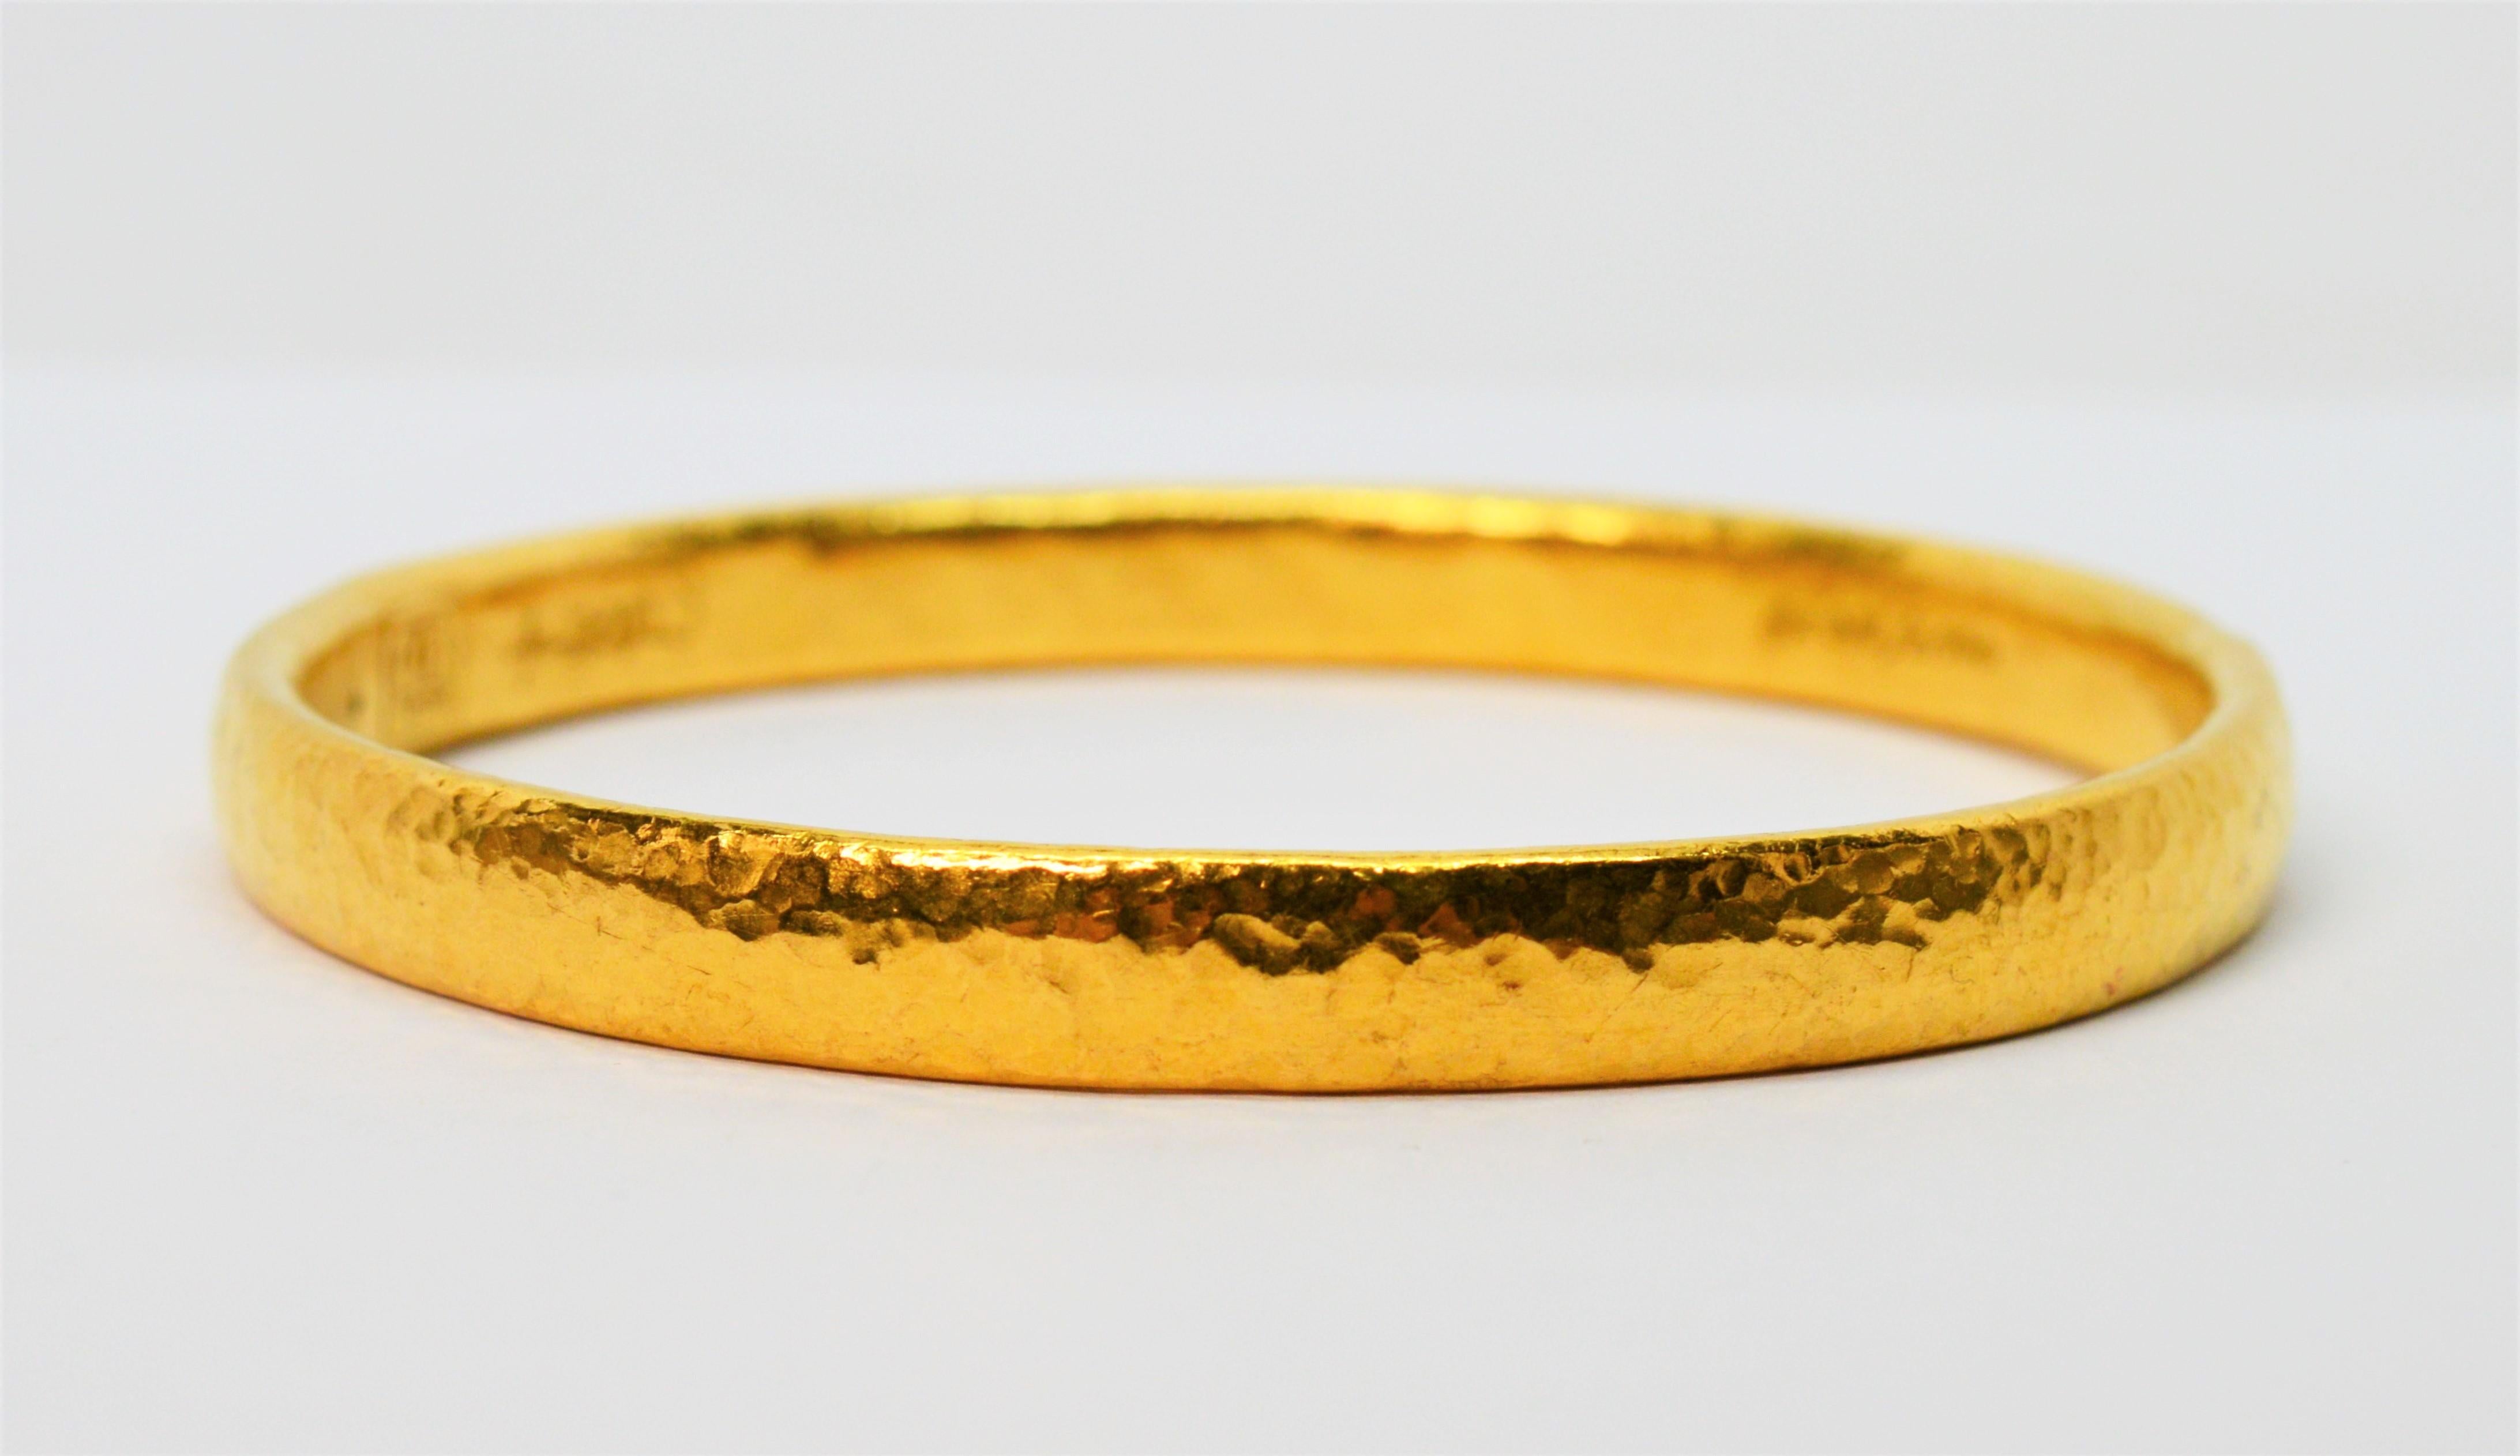 Enjoy the simplicity of this exquisite twenty four karat 24K hammered yellow gold bangle bracelet by internationally known Gurhan Atelier. 
New York based with master artisans in Istanbul to create this hand hammered lost wax cast notable piece. The